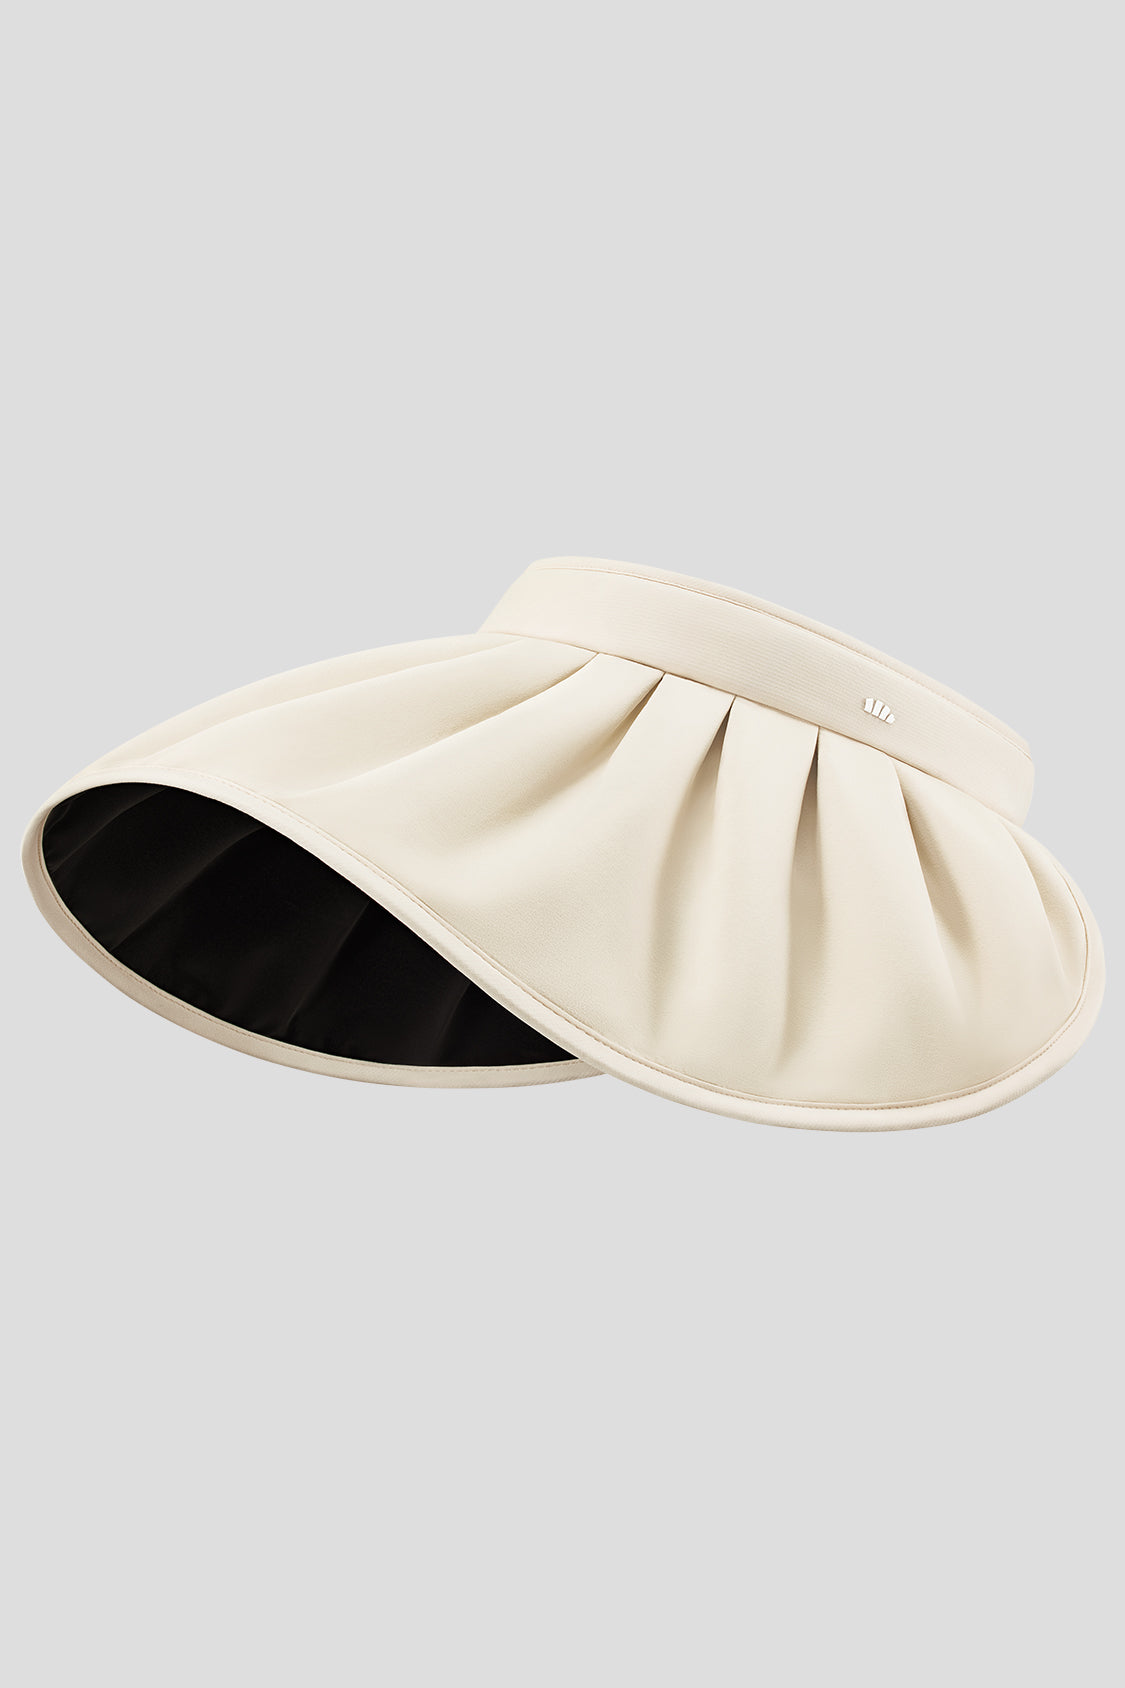 Visor Beret: Simple Fashion Casual Sun Hat For Women, UV Protection For  Outdoor Sports, Travel, Driving, And Beach Shade From Lukasamanic, $17.4